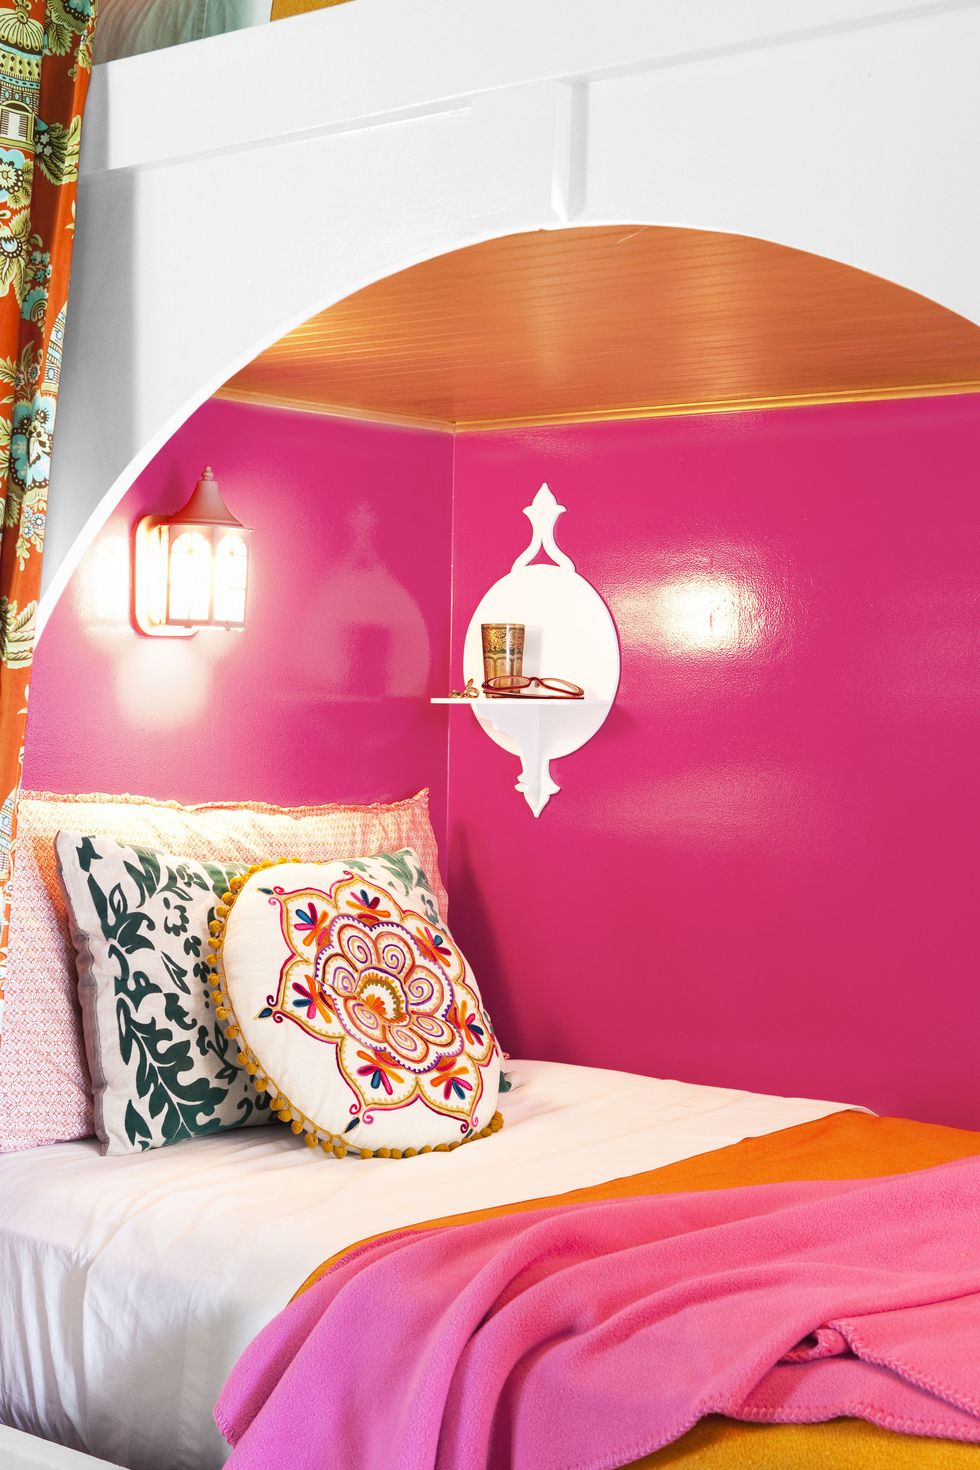 https://hips.hearstapps.com/hmg-prod/images/roger-davies-pink-bed-1576538481.jpg?crop=1xw:1xh;center,top&resize=980:*